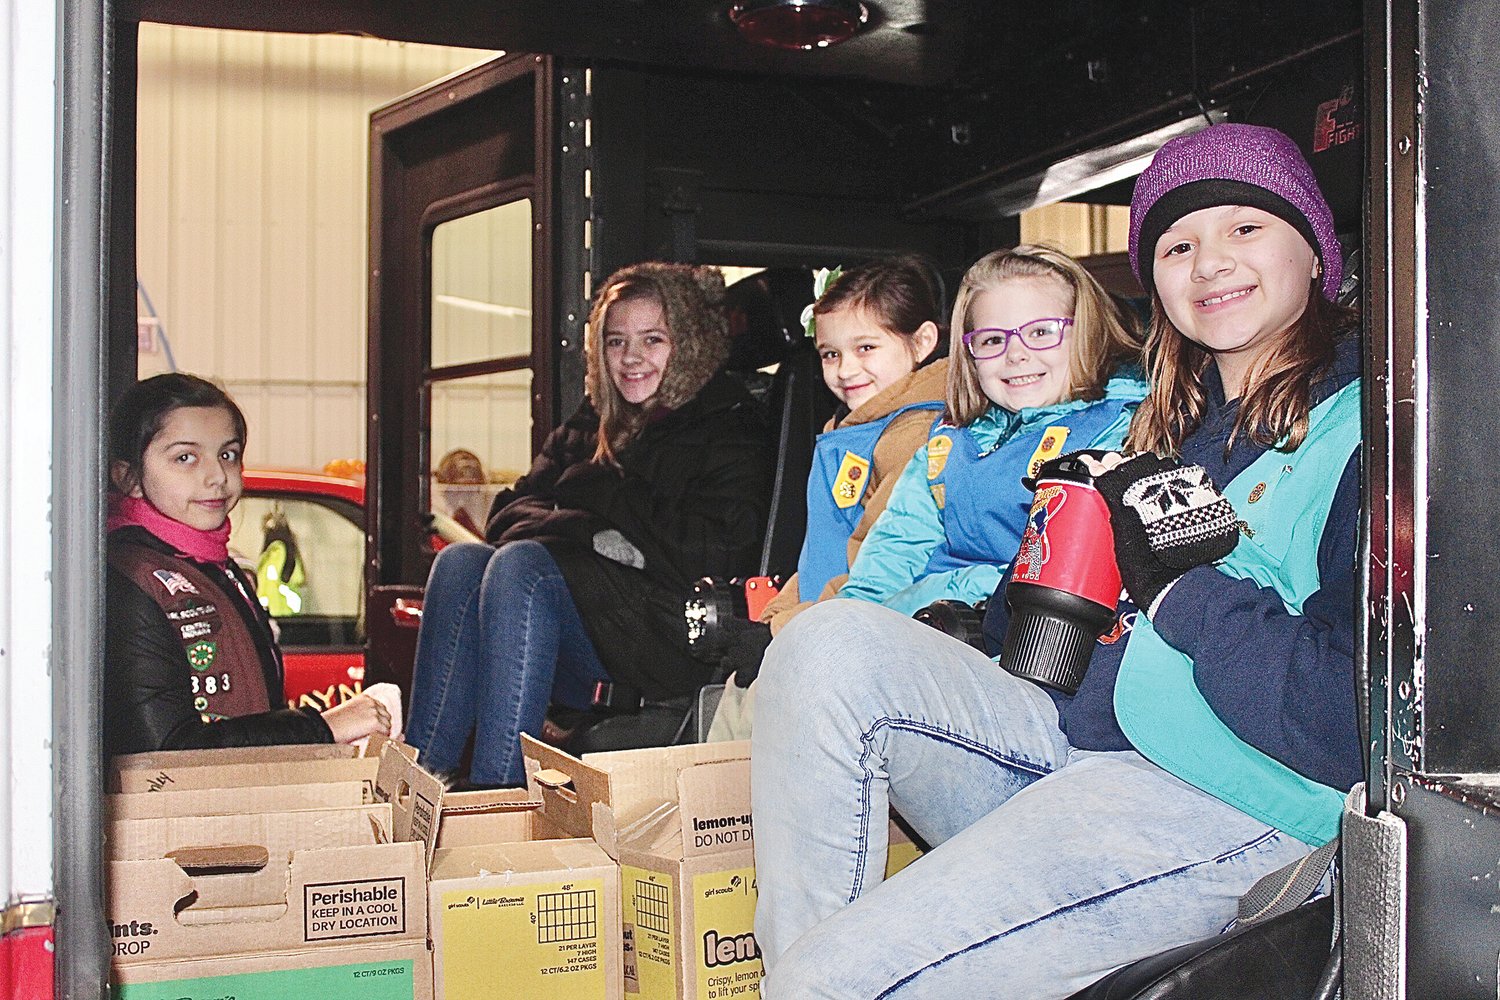 Girl Scouts from multiple troops climb aboard the Waynetown Volunteer Fire Department truck Saturday in Waynetown to deliver cookies to more than 70 residents. They include Jillian Clark, from left, Lacie Bush, Carley Simms, Maiah Rathburn and Elizabeth Ellingwood.